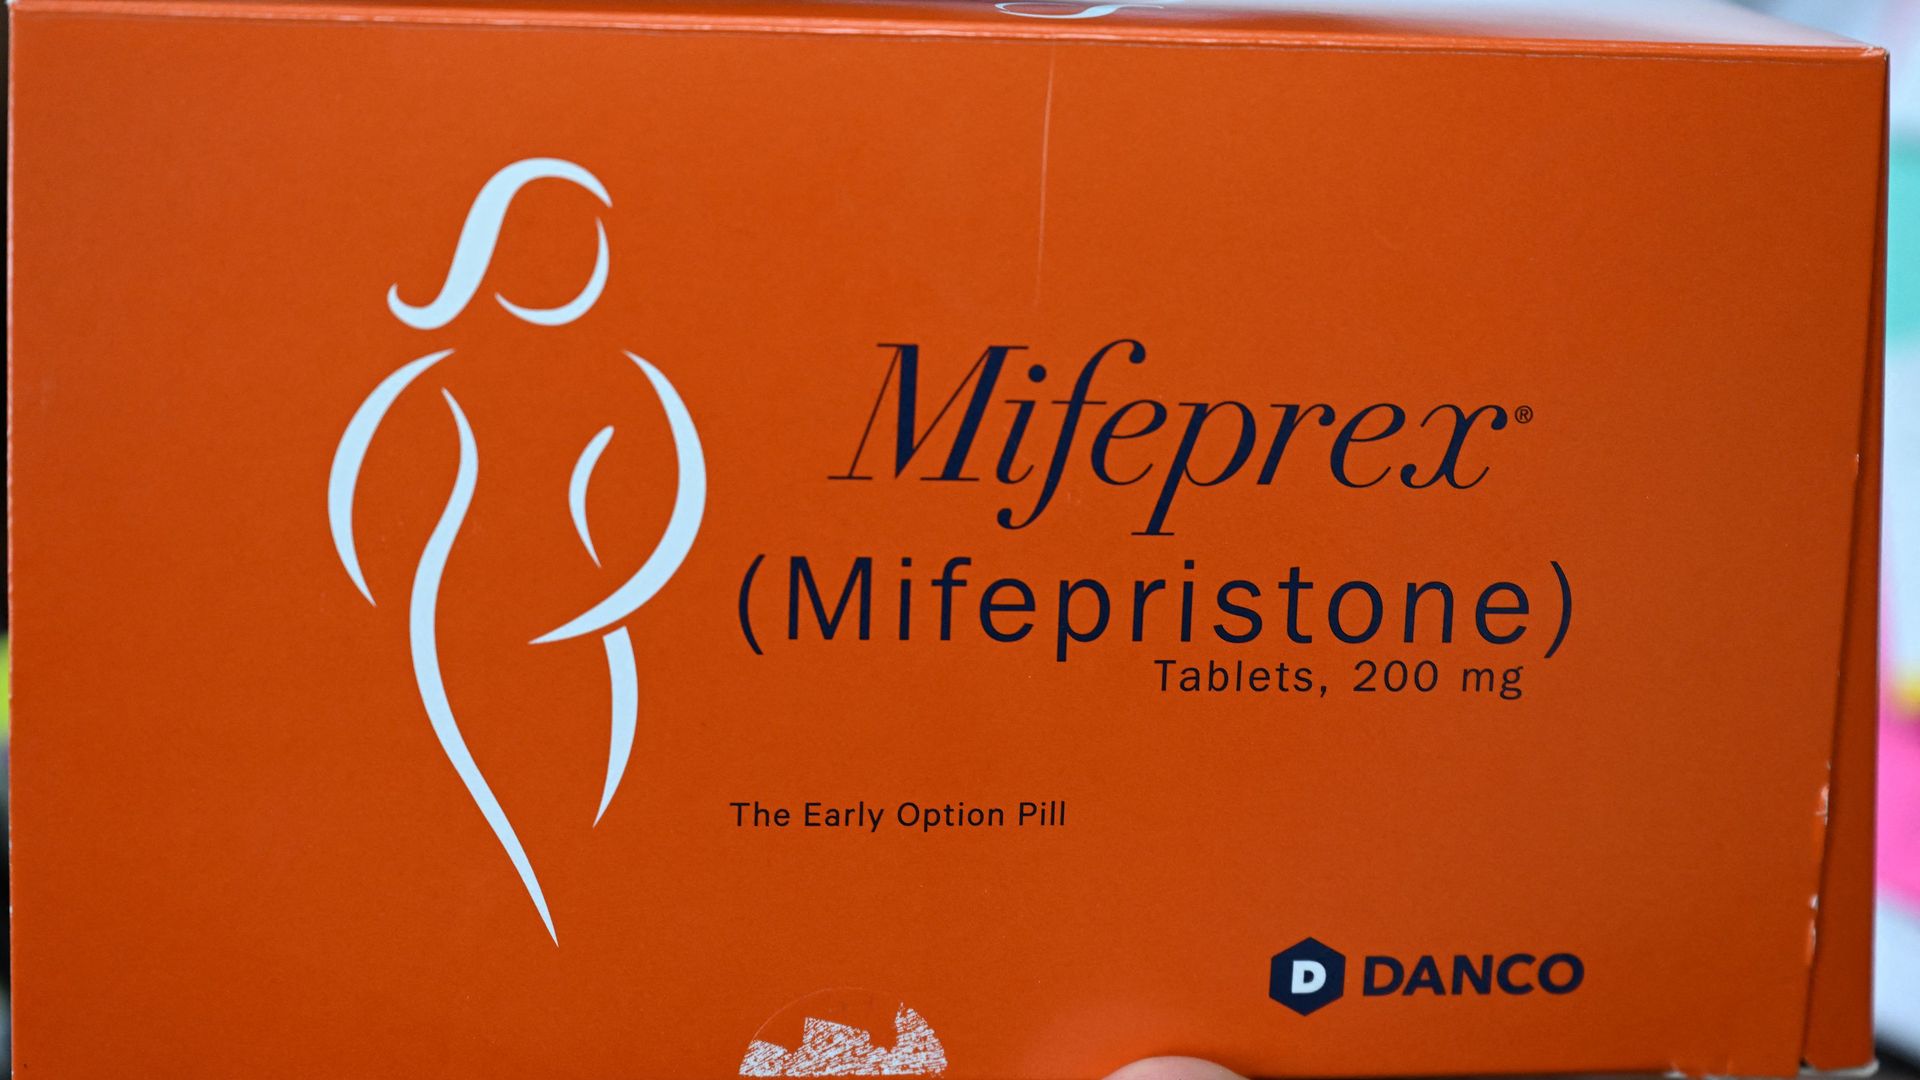 Picture of a box of mifepristone